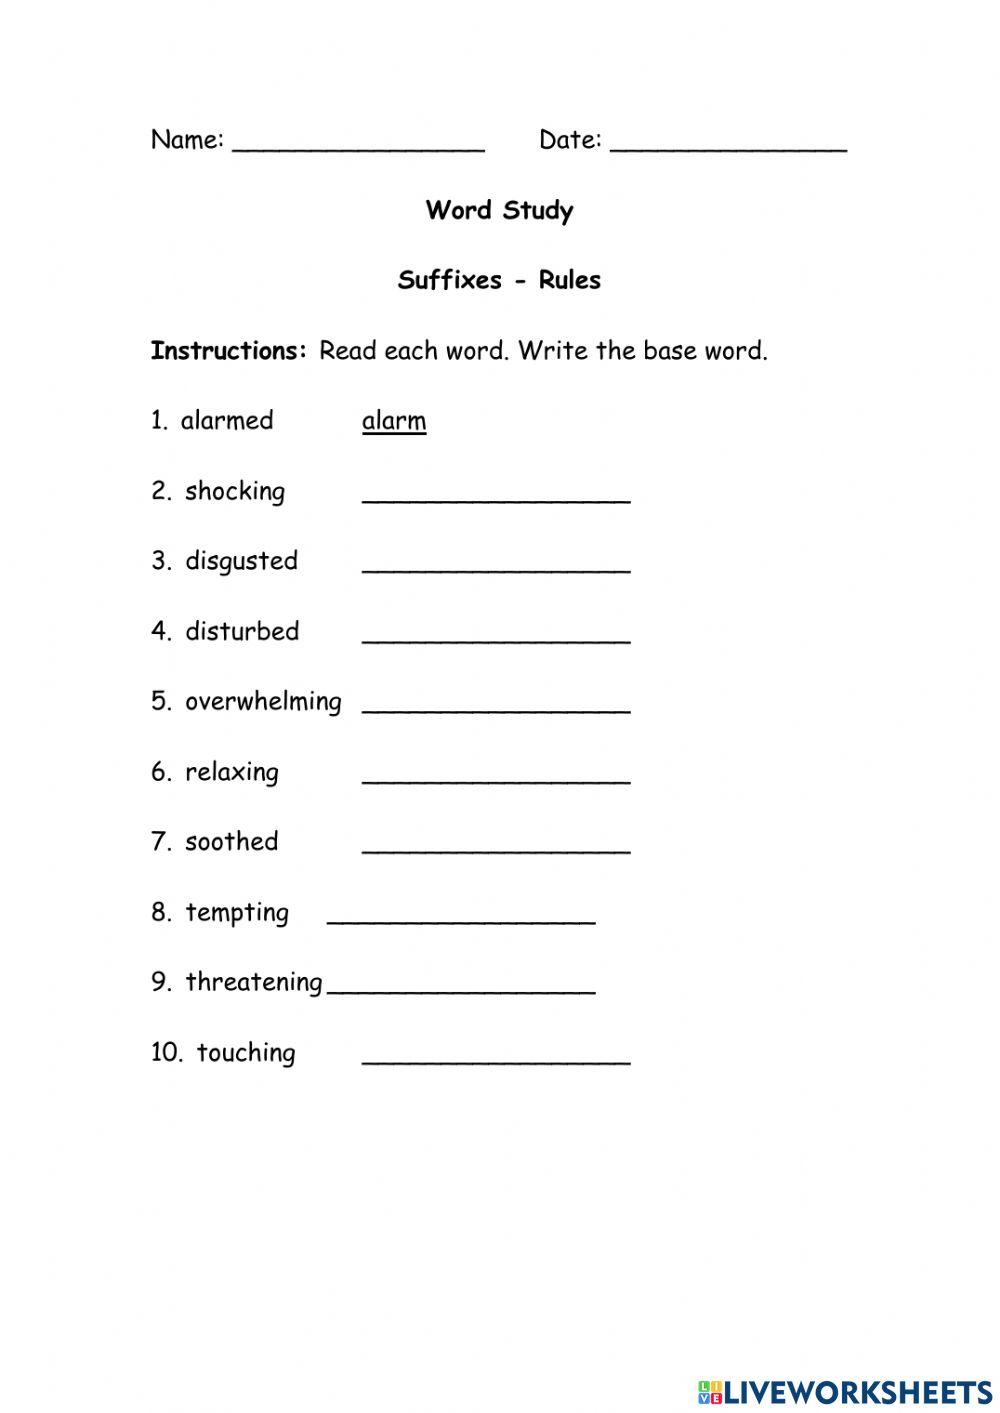 Suffixes - Rules